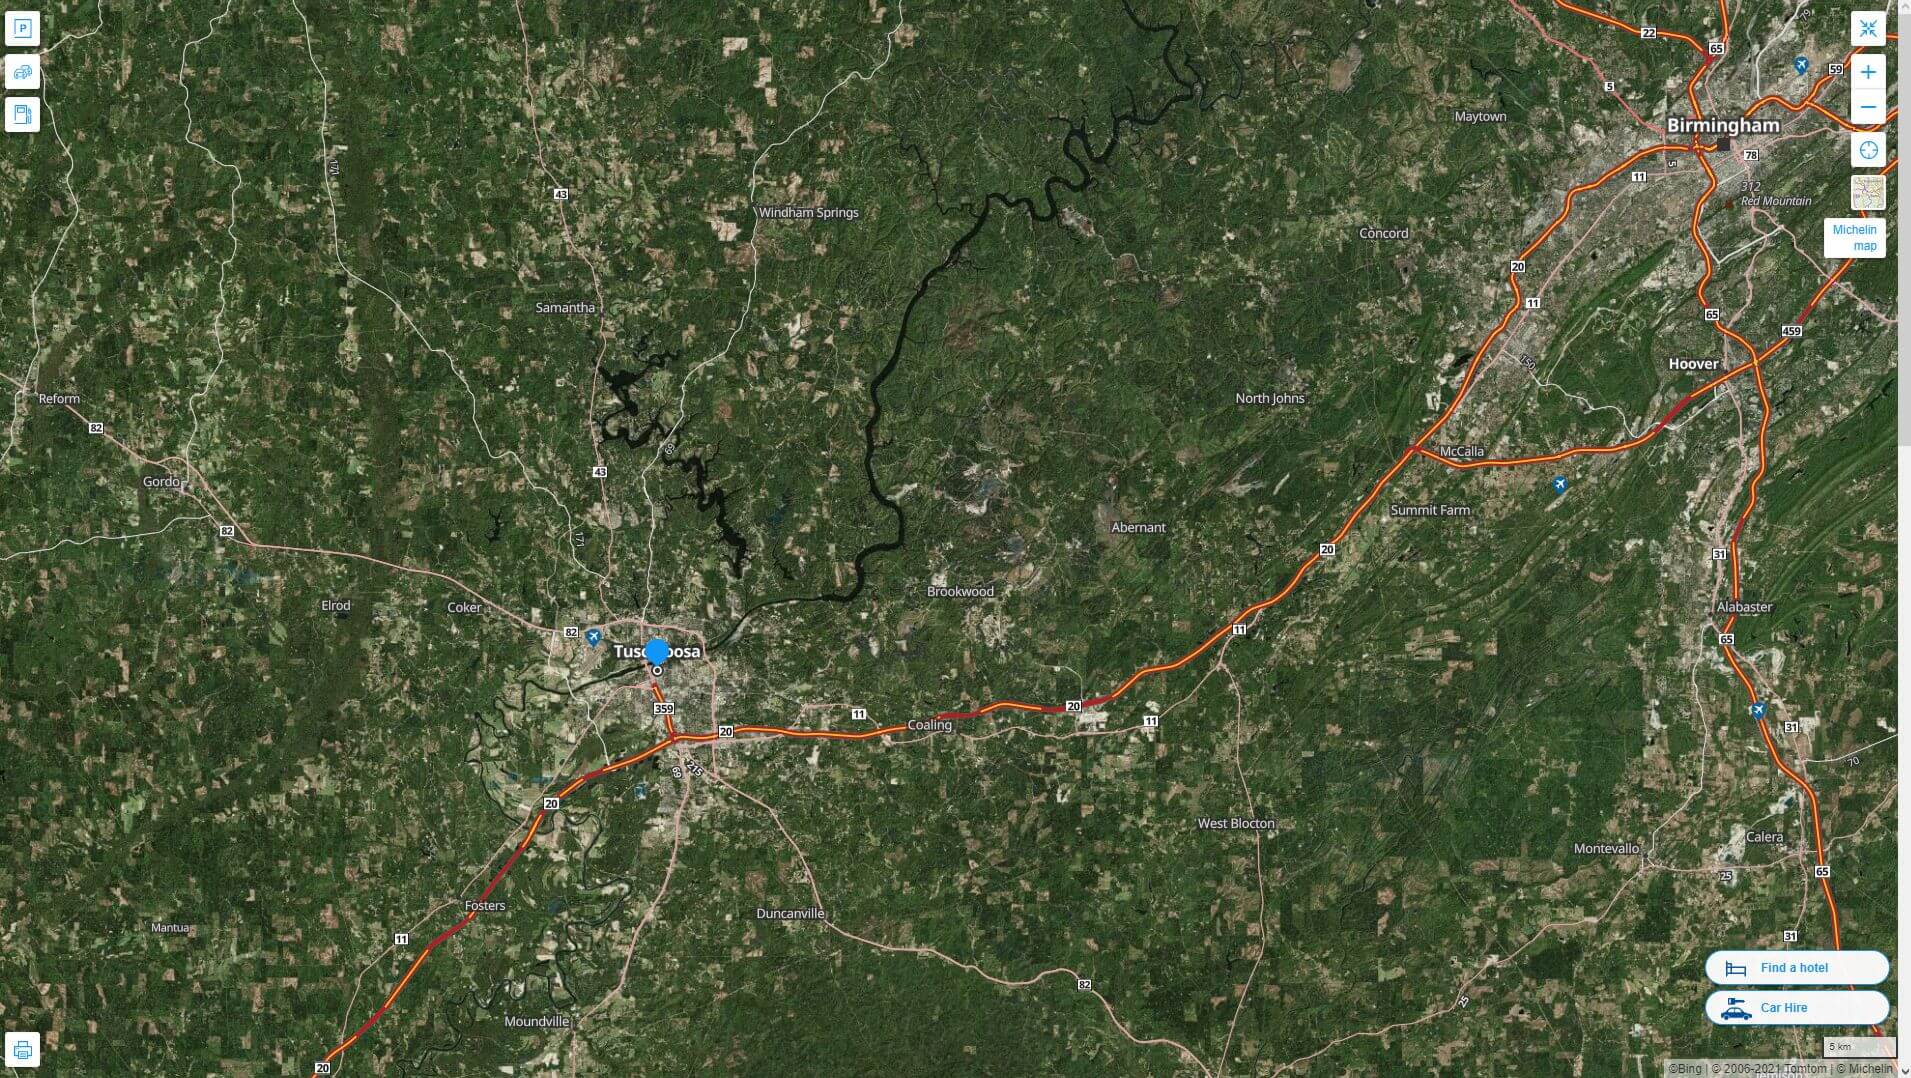 Tuscaloosa Alabama Highway and Road Map with Satellite View